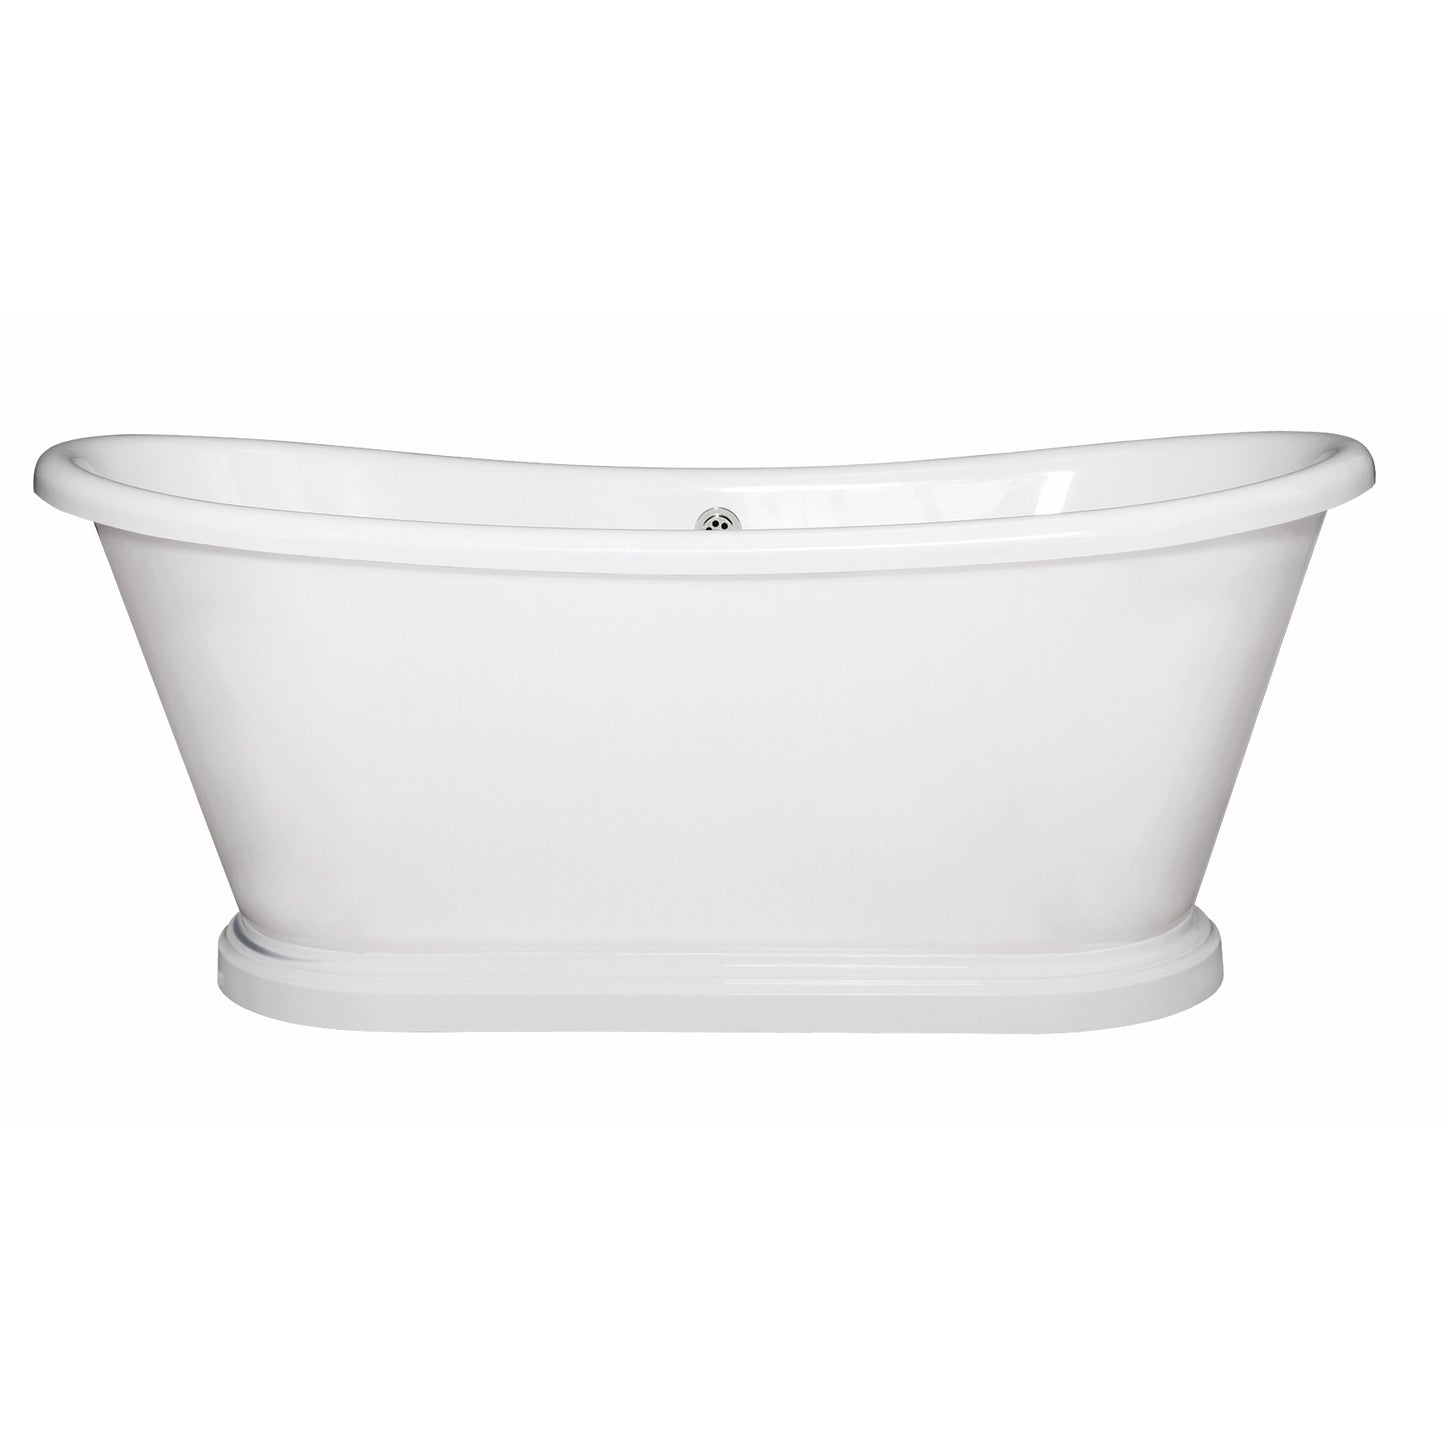 Boat White Doubled Ended Acrylic Freestanding Bath